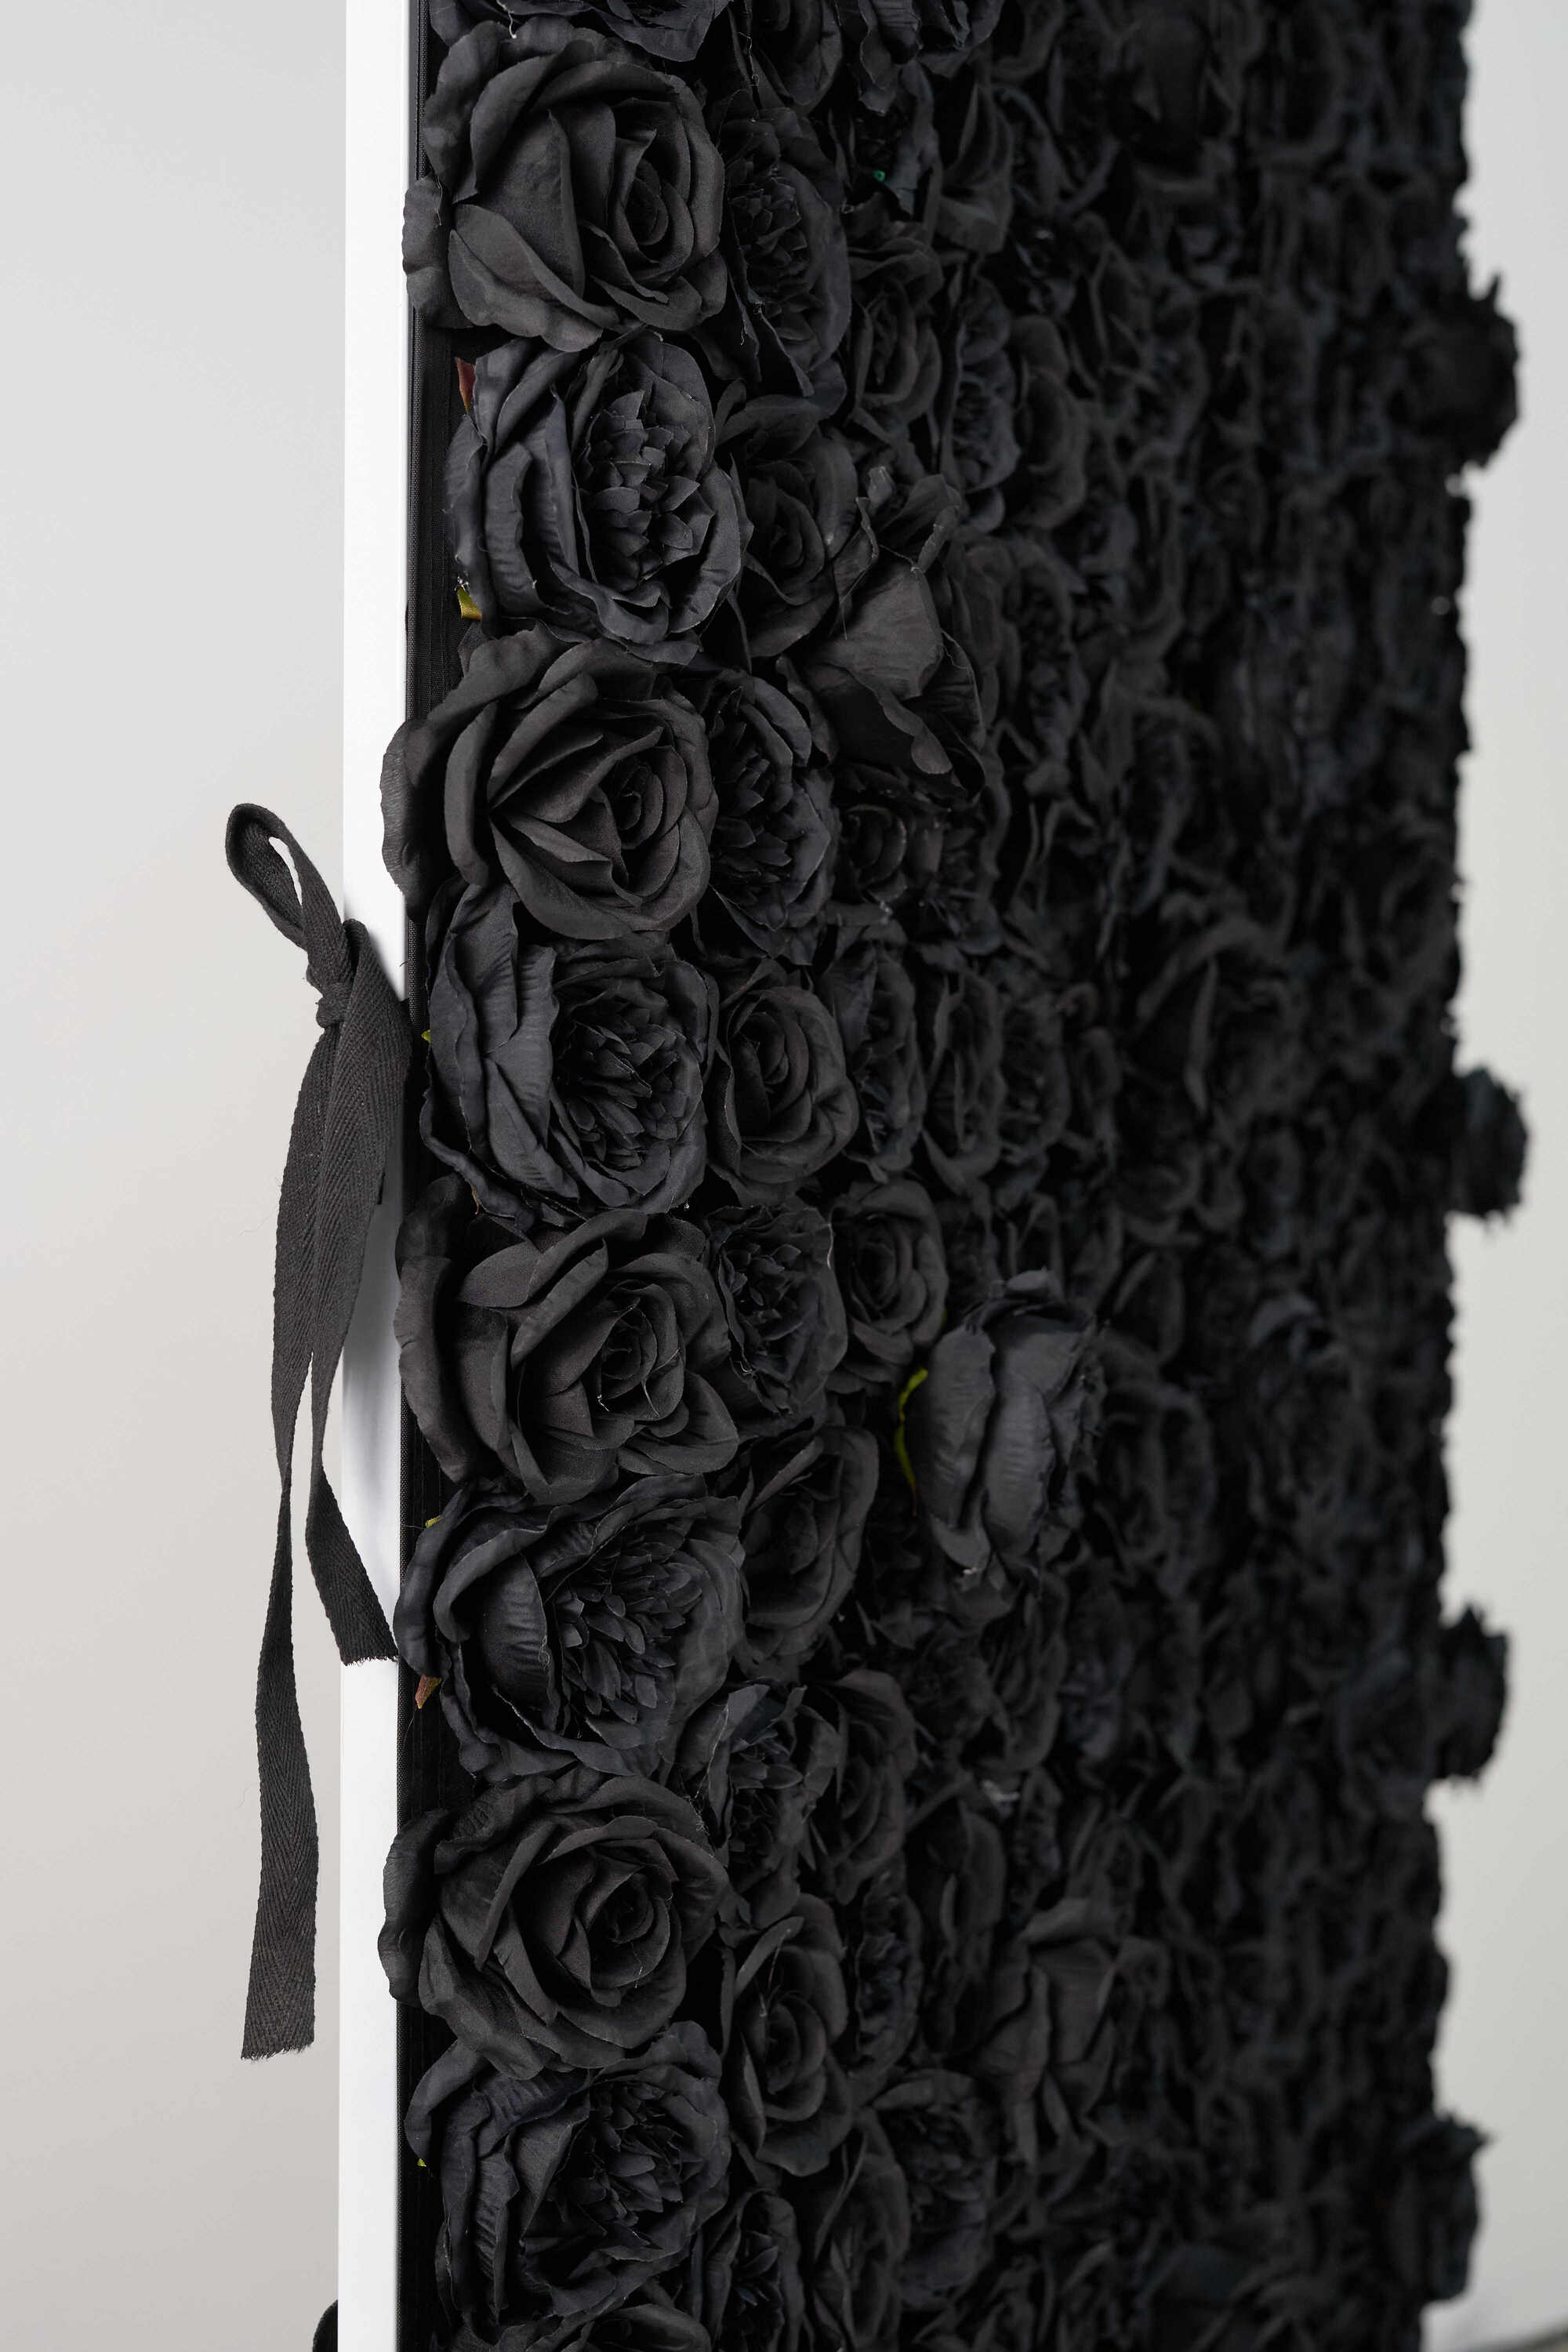 Flower Wall Pure Black Rose Fabric Rolling Up Curtain Floral Backdrop Wedding Party Proposal Decor